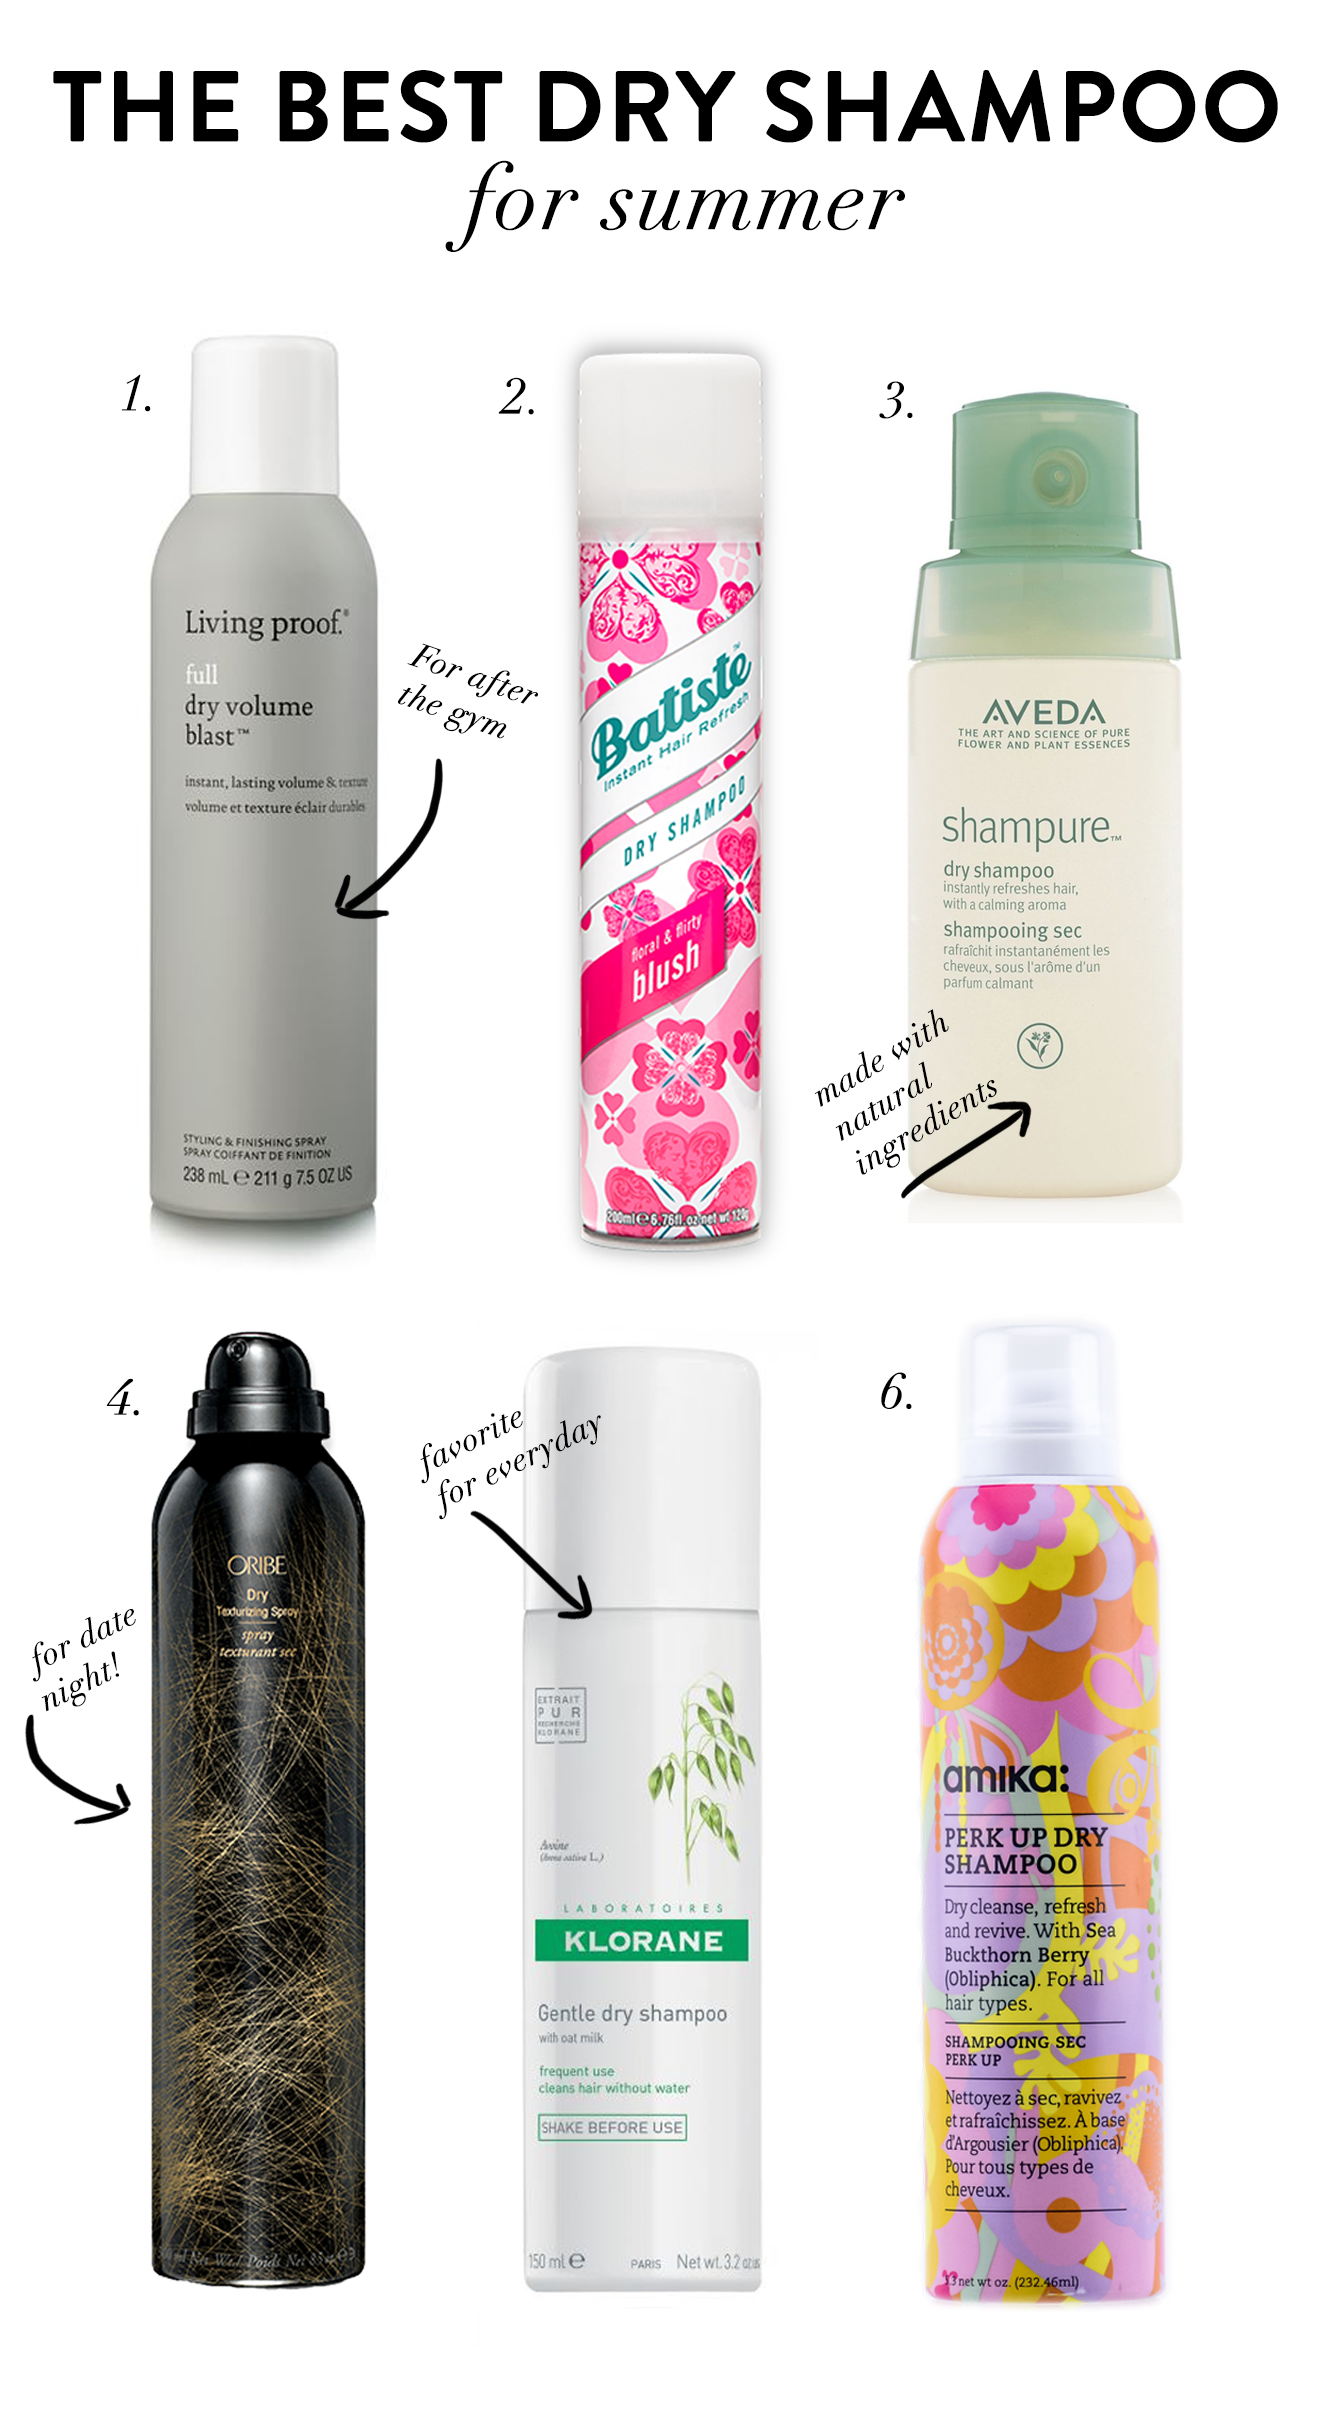 The Dry Shampoos | Charmingly Styled